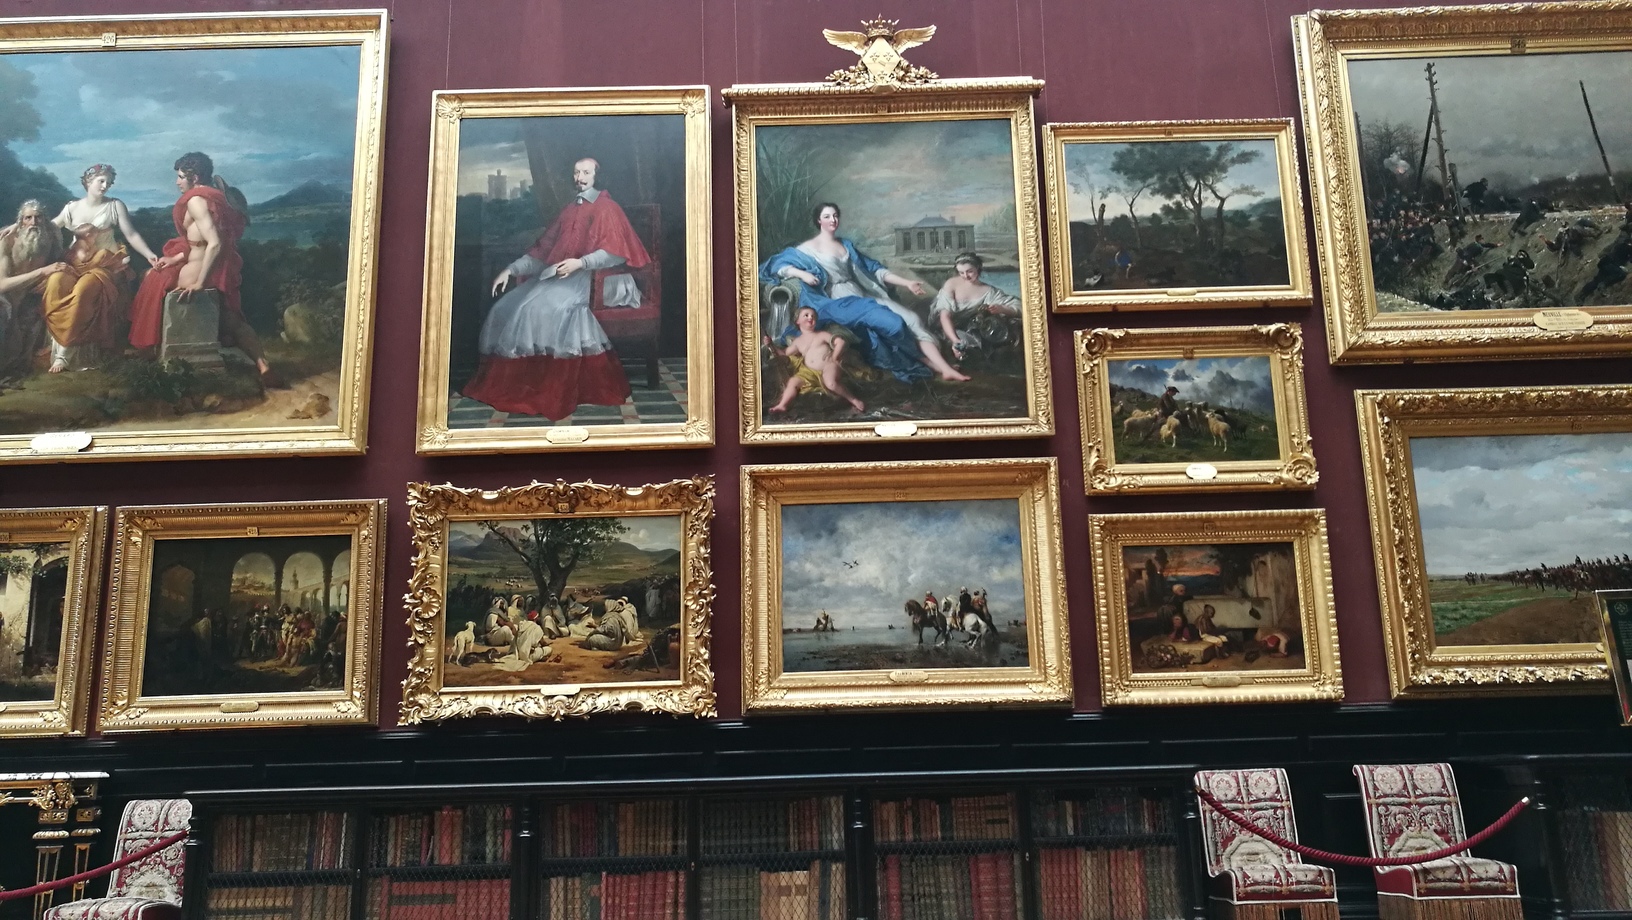 The Gallery of Painting